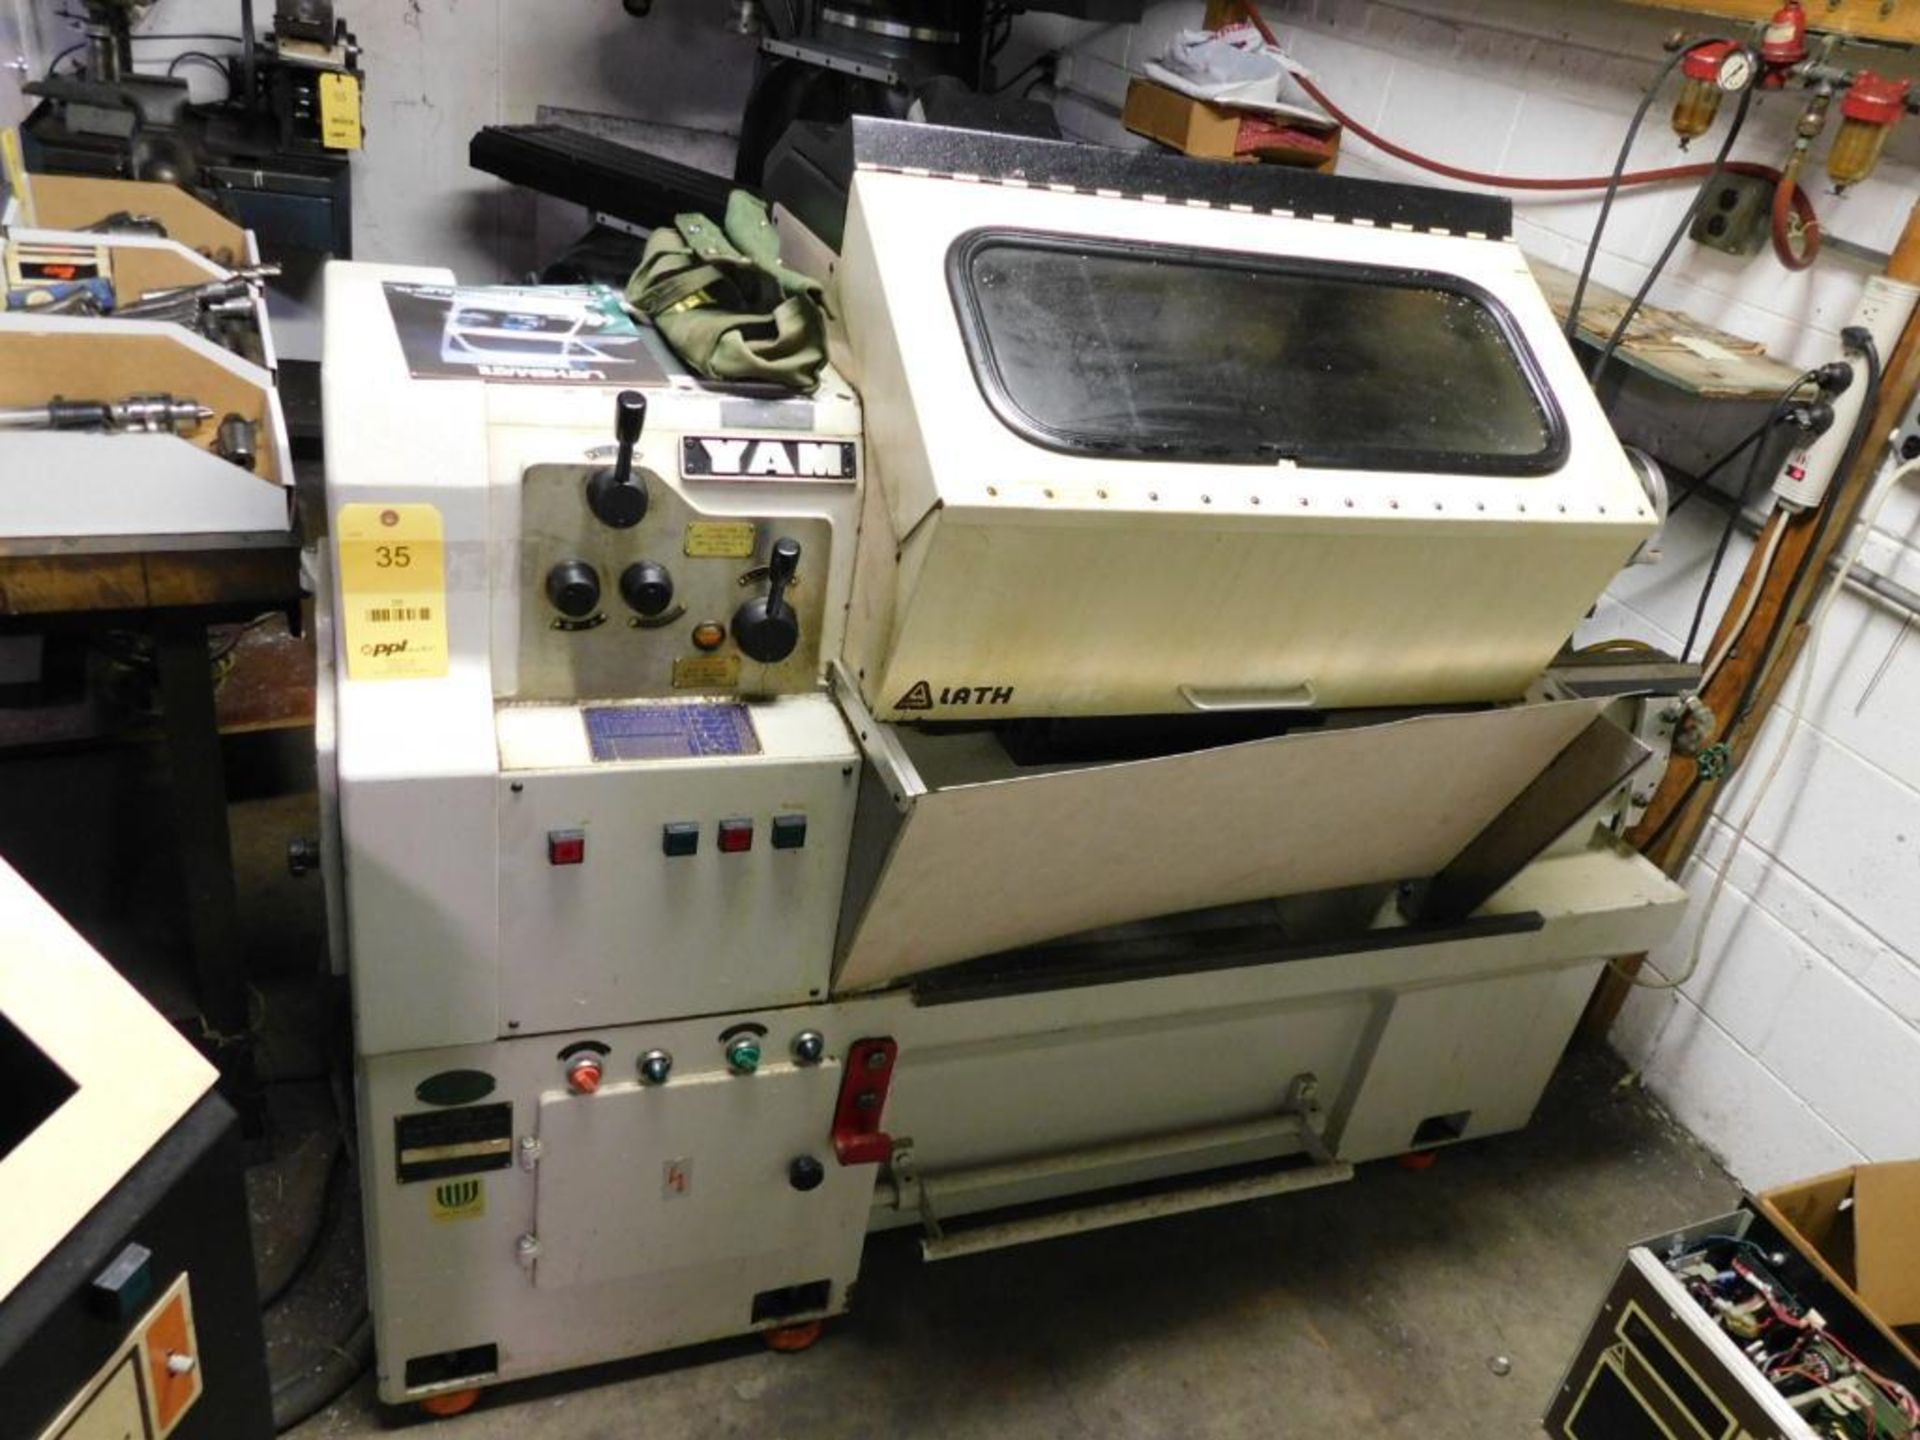 Yam Lathemate 550 Precision High Speed Lathe, 14" Swing, 30" Distance Between Centers (NON-OPERATION